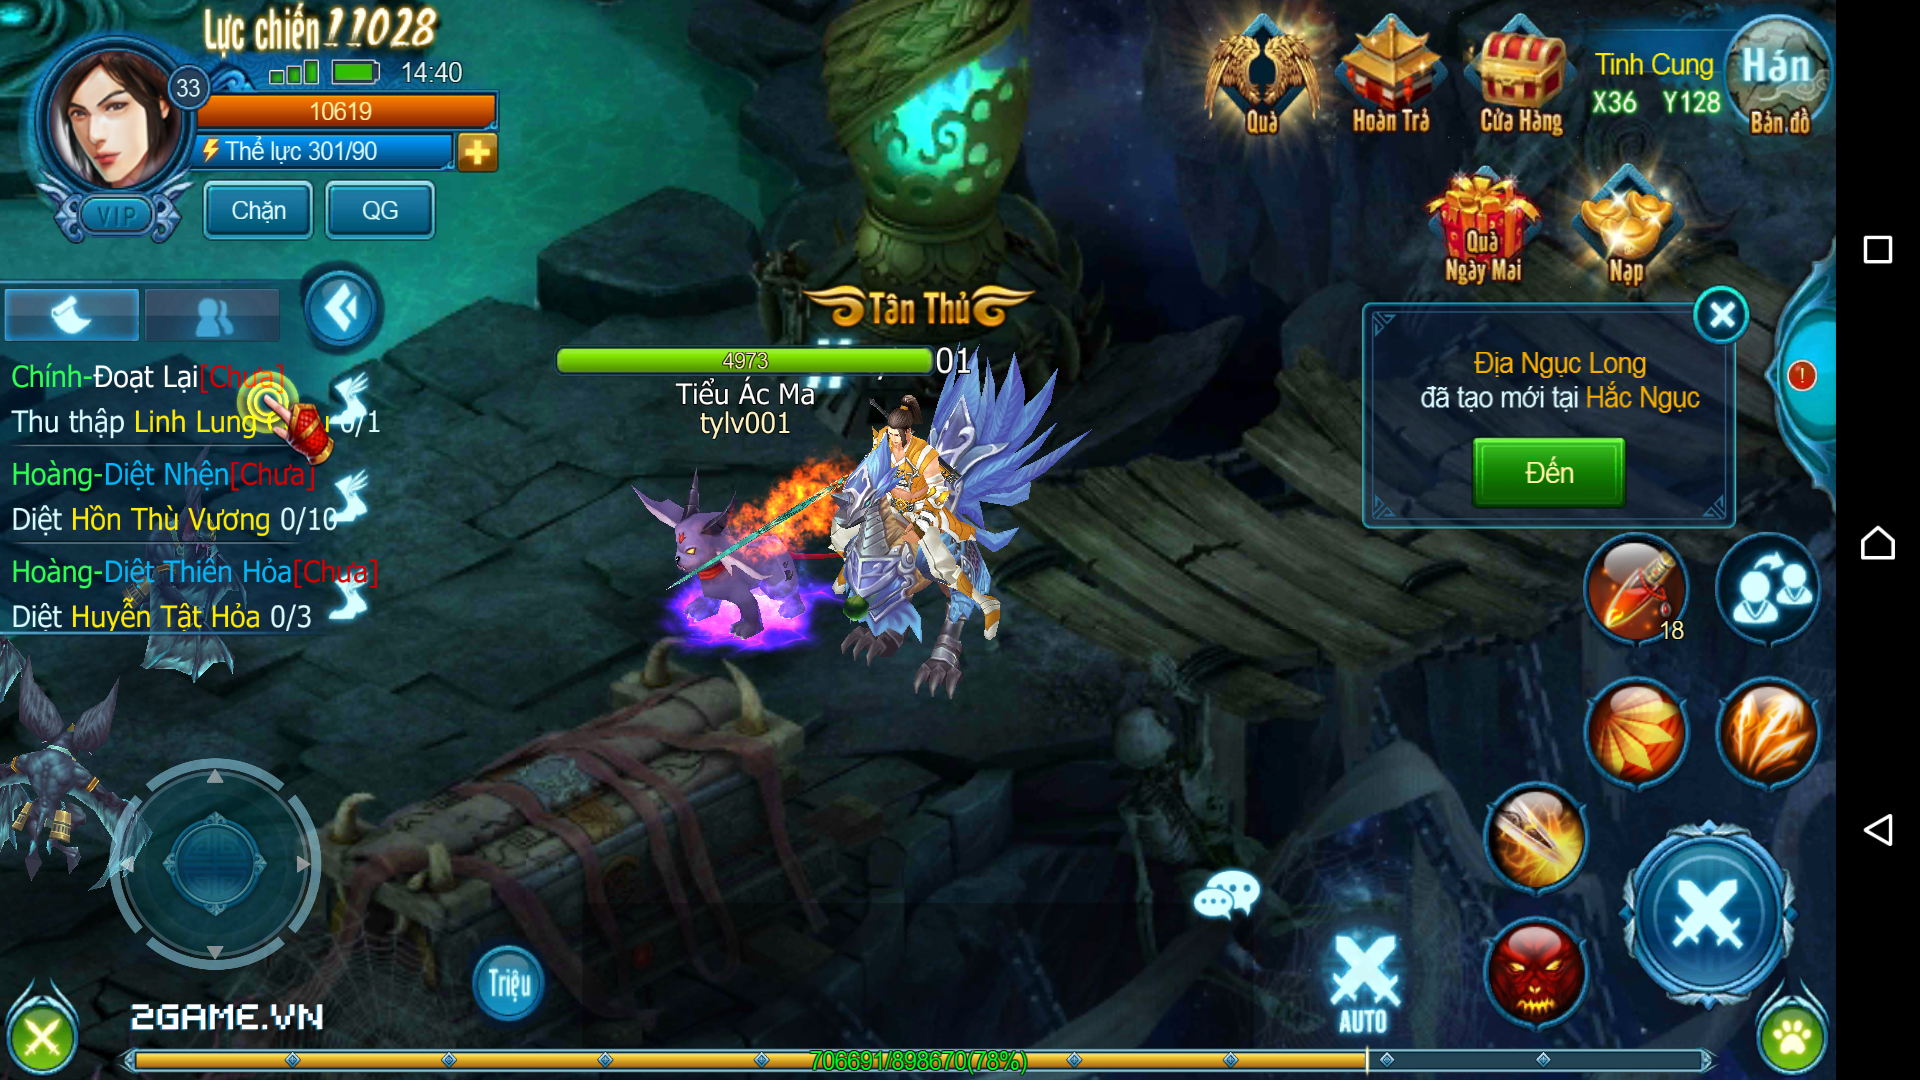 https://s3.cloud.cmctelecom.vn/2game-vn/pictures/images/2015/10/26/2game-trai-nghiem-ban-long-3d-mobile-8.jpg